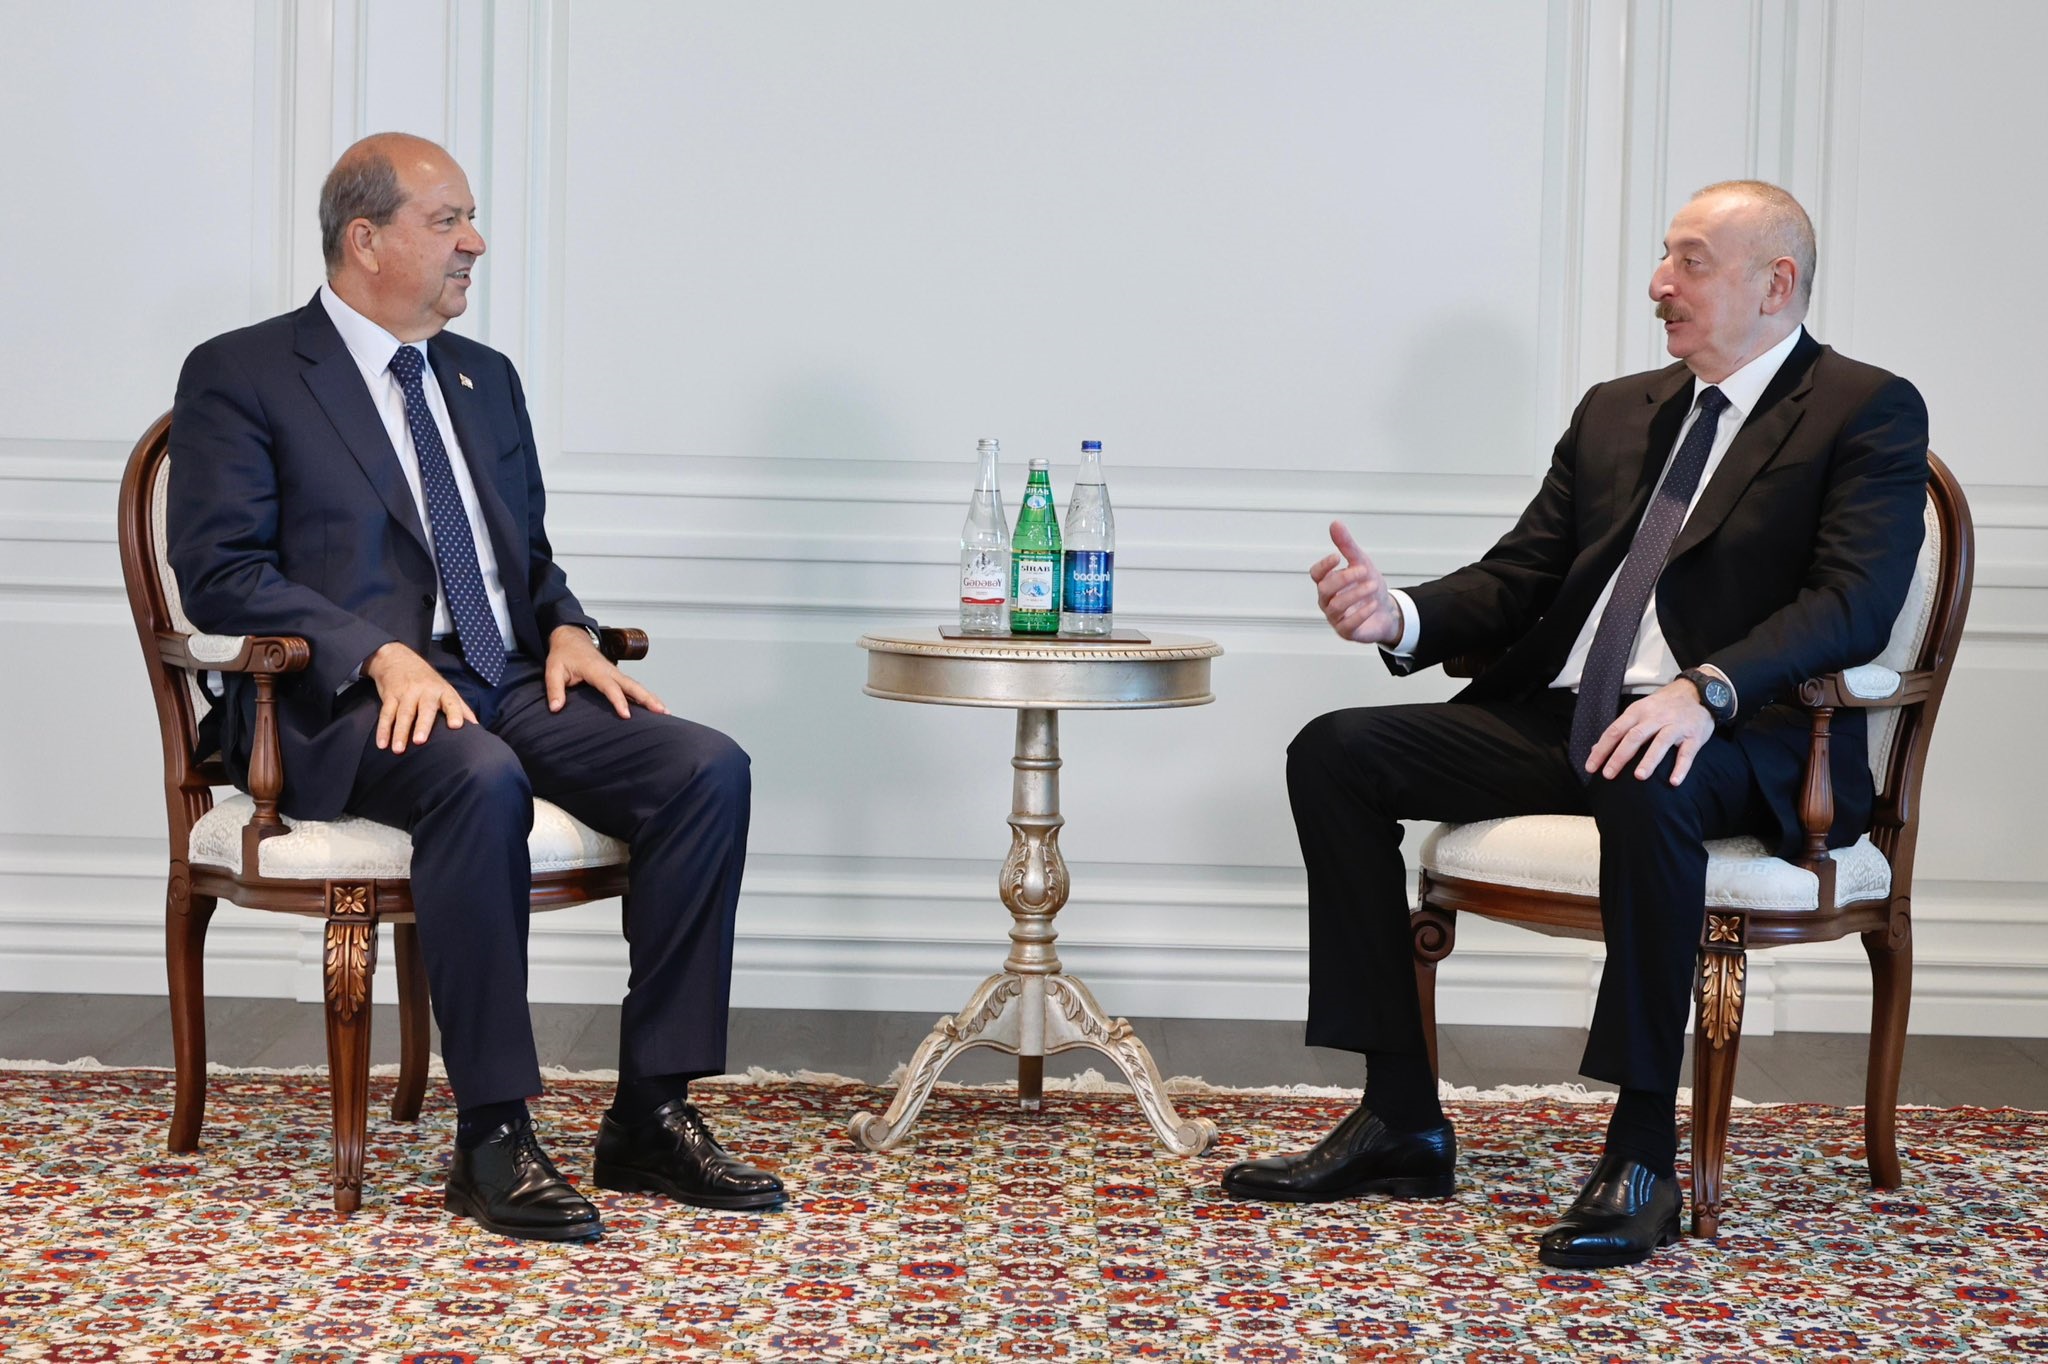 Aliyev ‘attaches great importance to the TRNC’